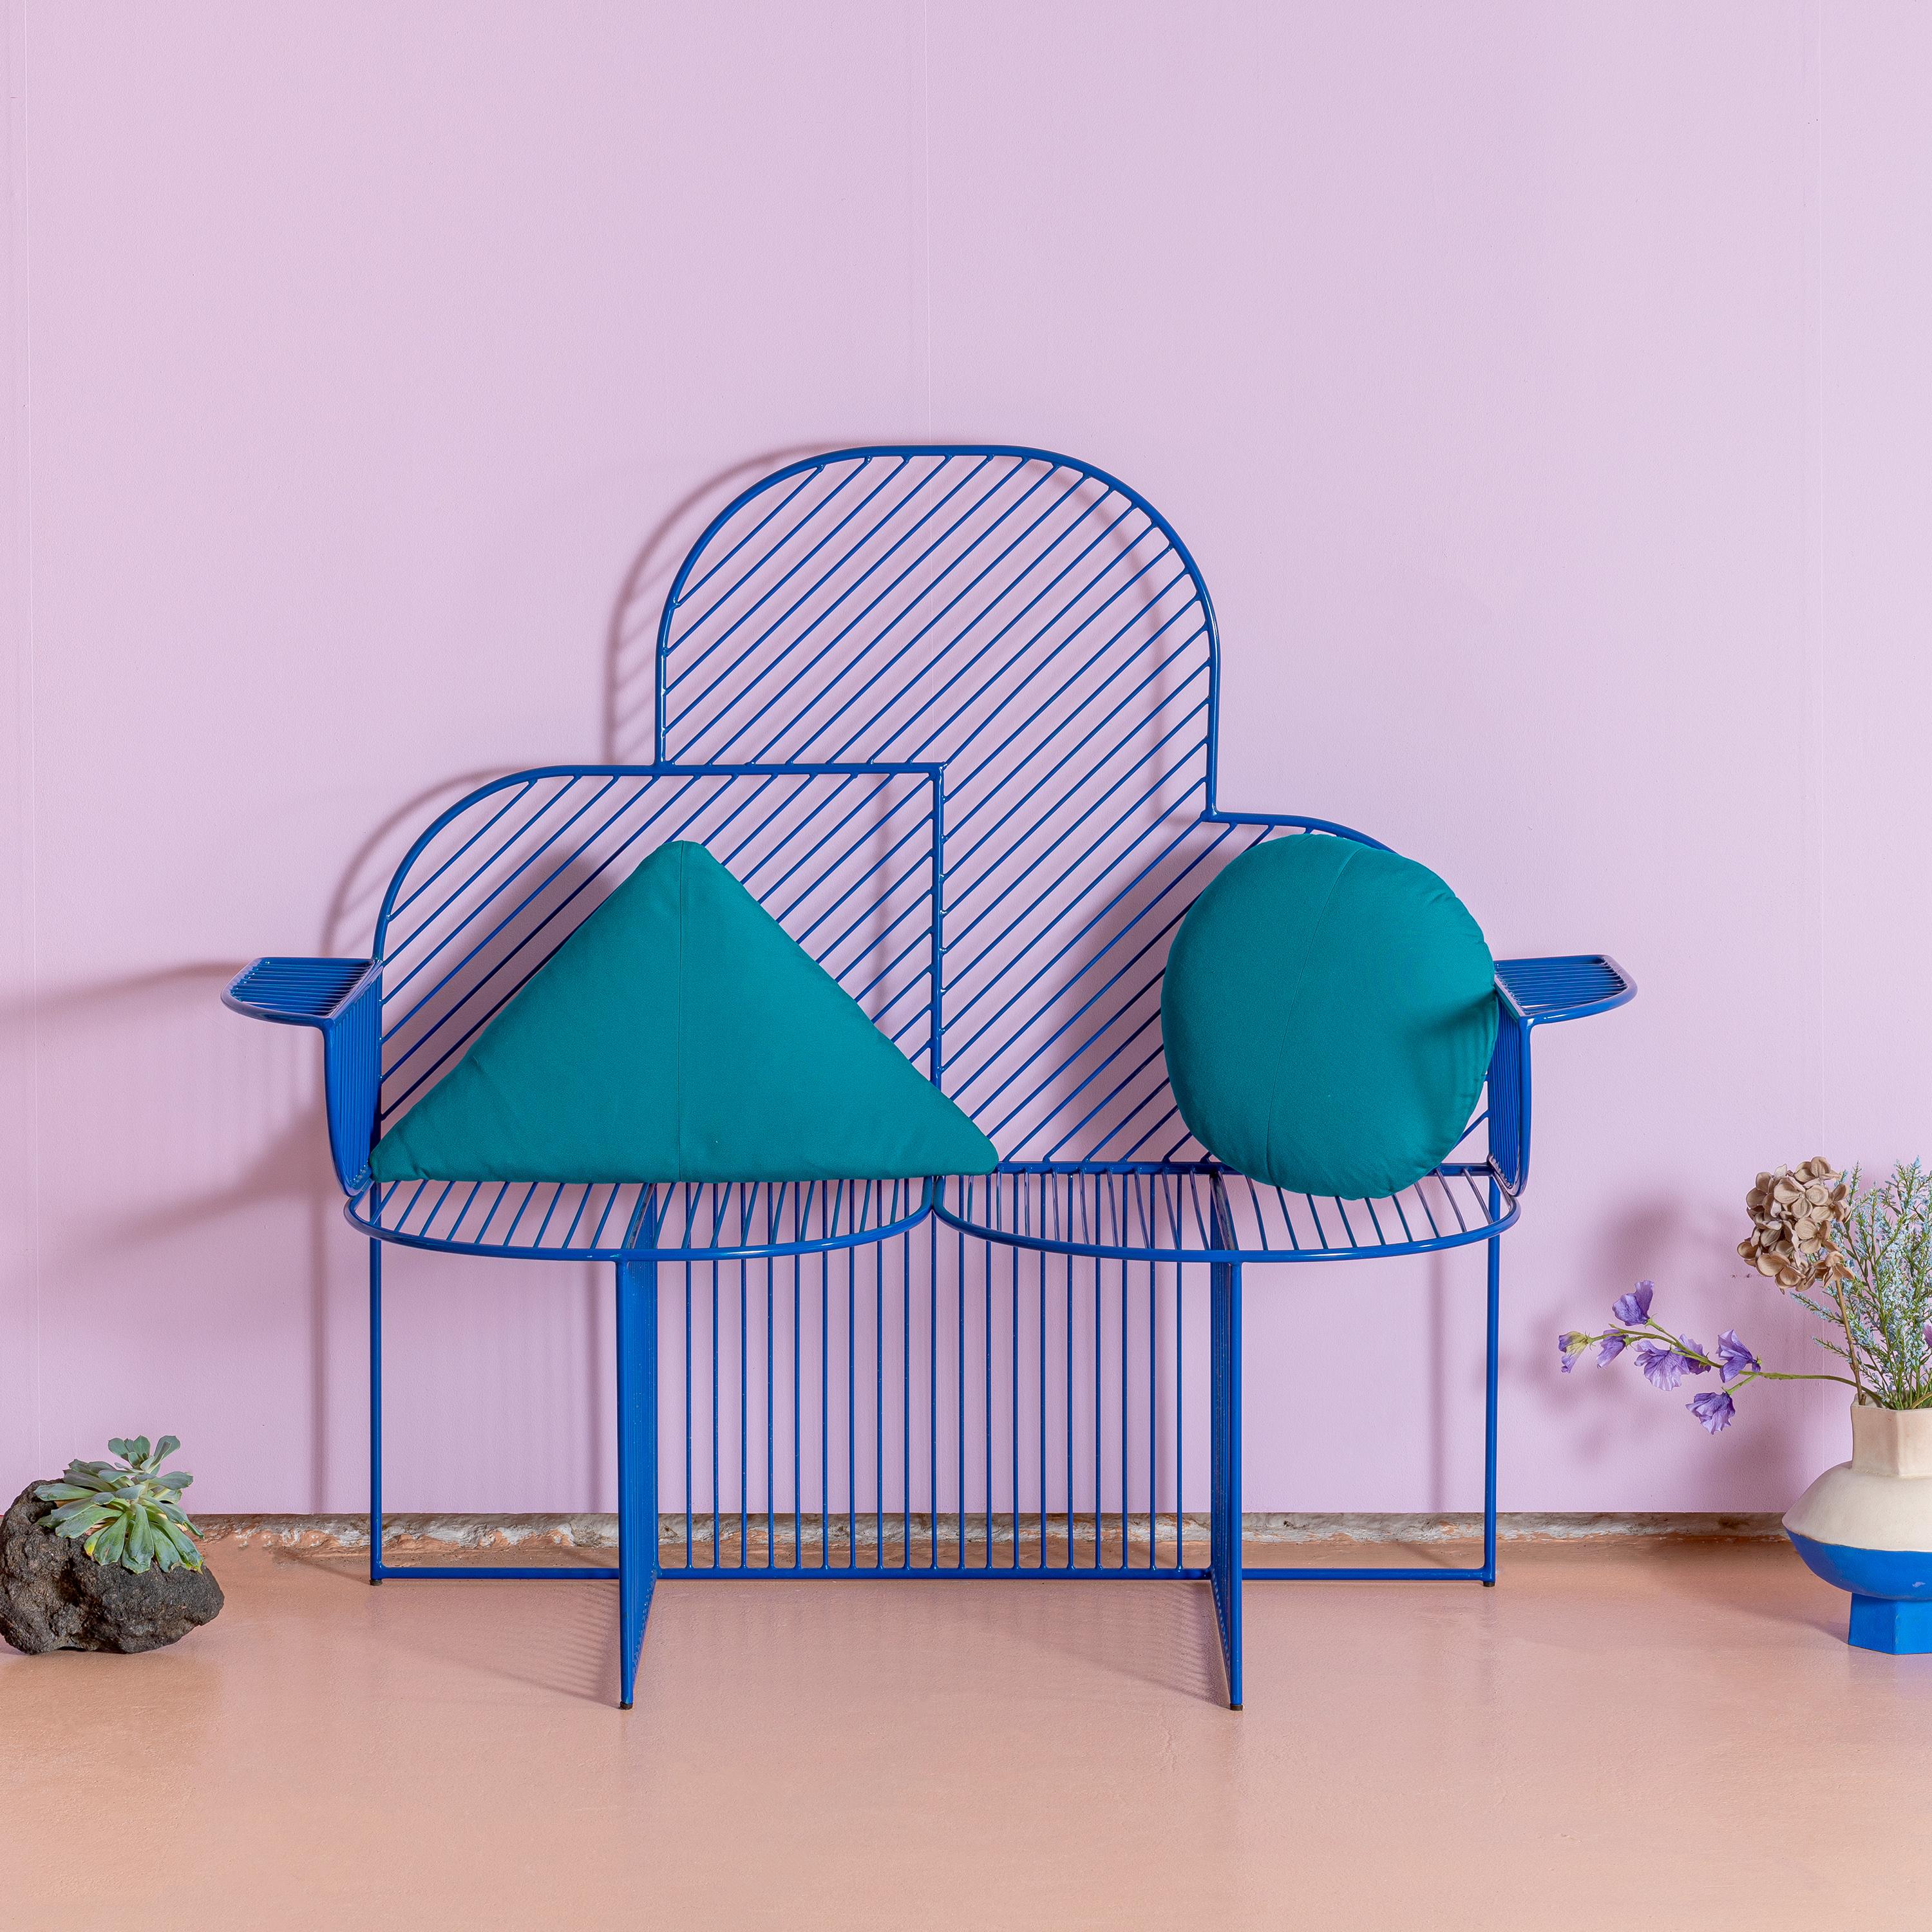 Powder-Coated Modern Bench, Wire Cloud Bench by Bend Goods, Electric Blue